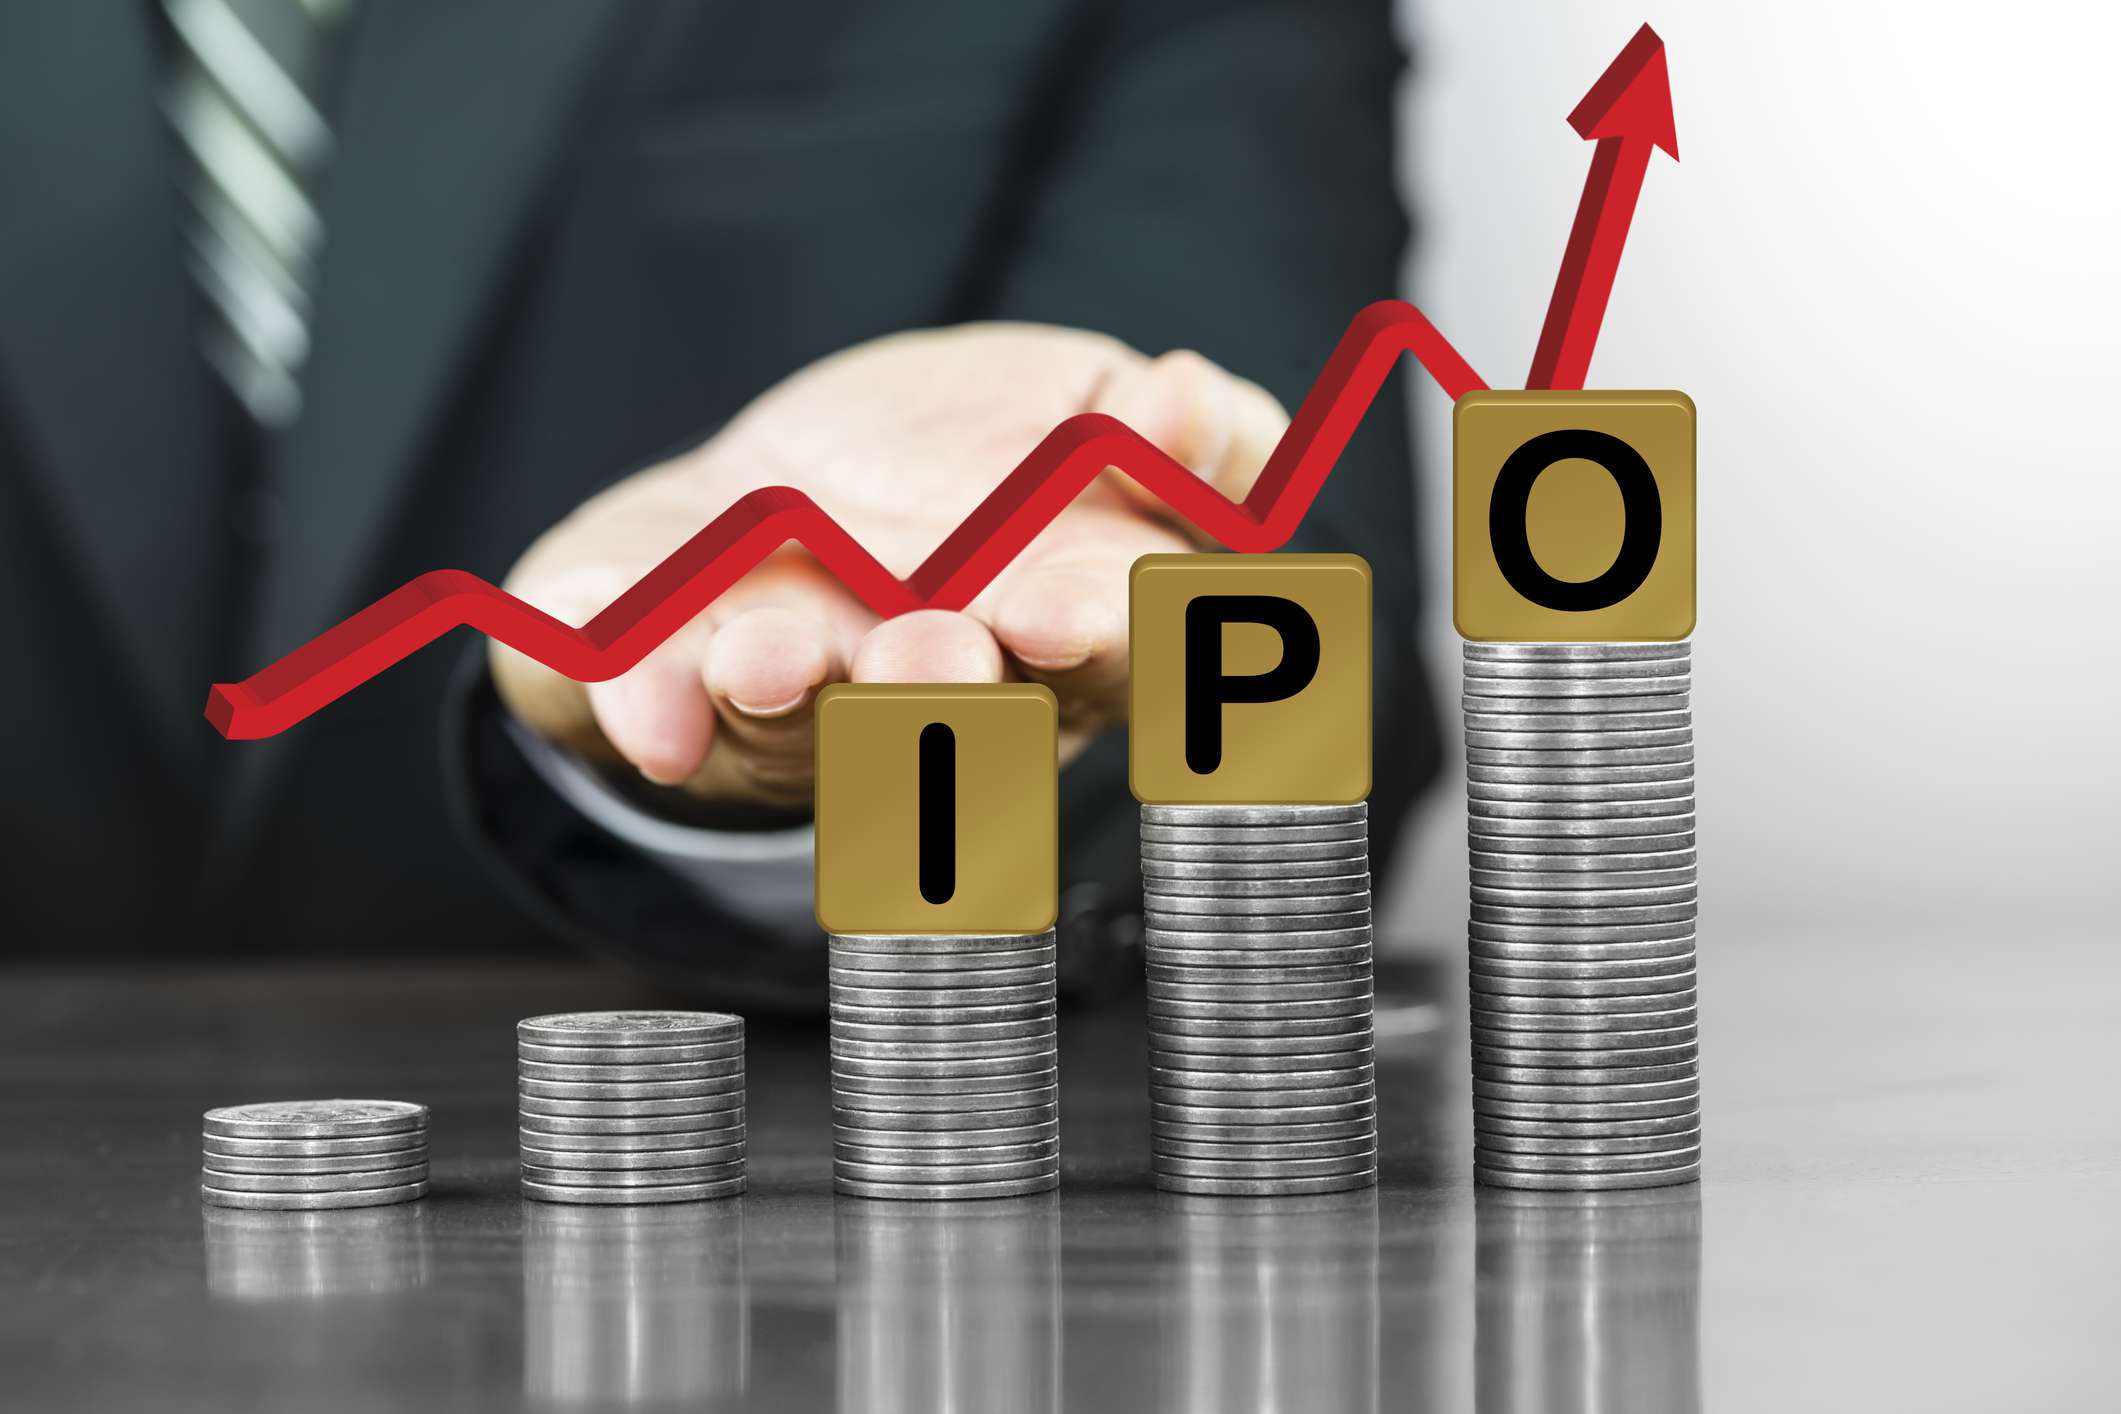 Abhishek Integration's IPO to open from 8-11 June